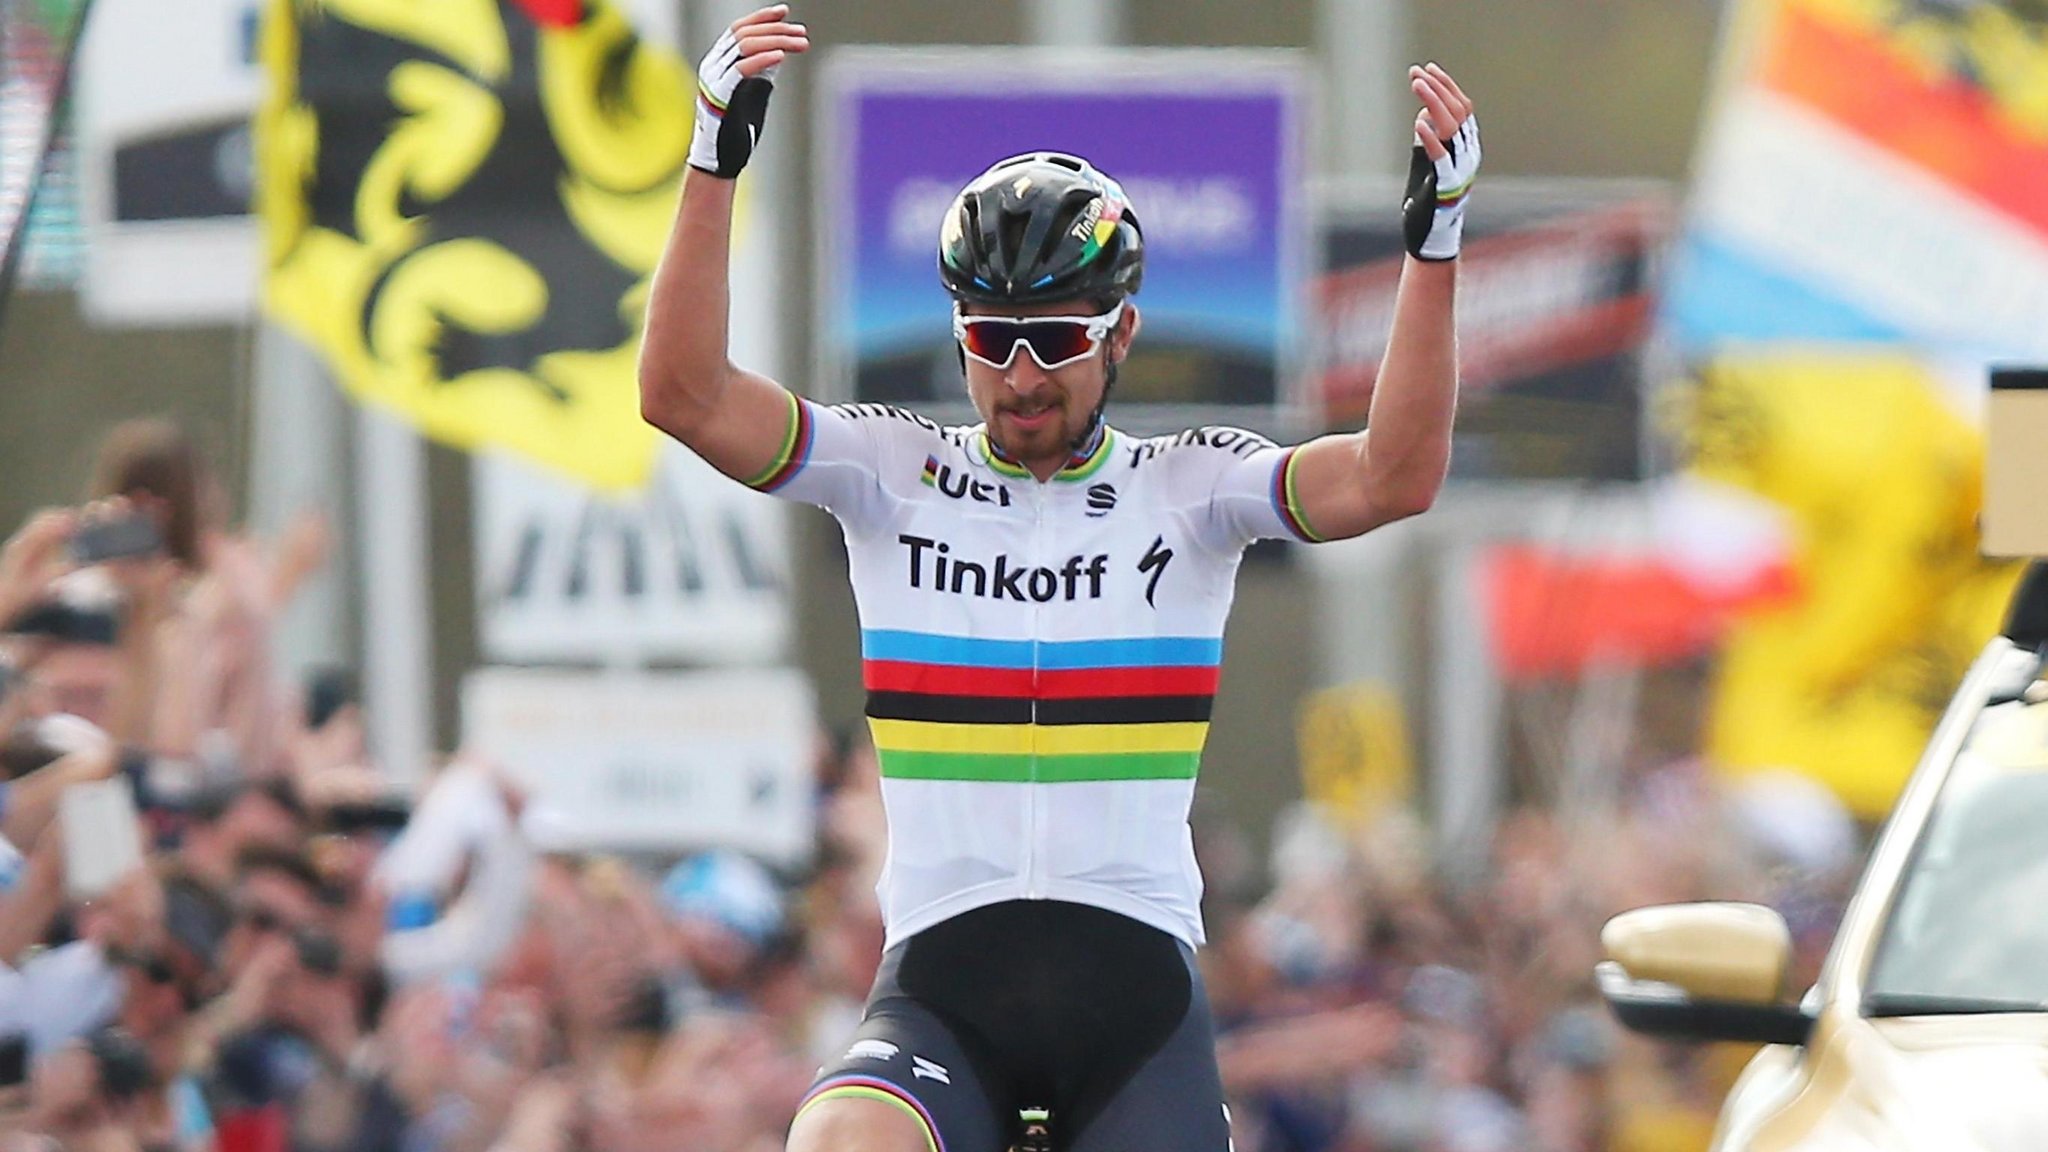 Why Cycling Loves The World Champion - Peter Sagan Flanders , HD Wallpaper & Backgrounds